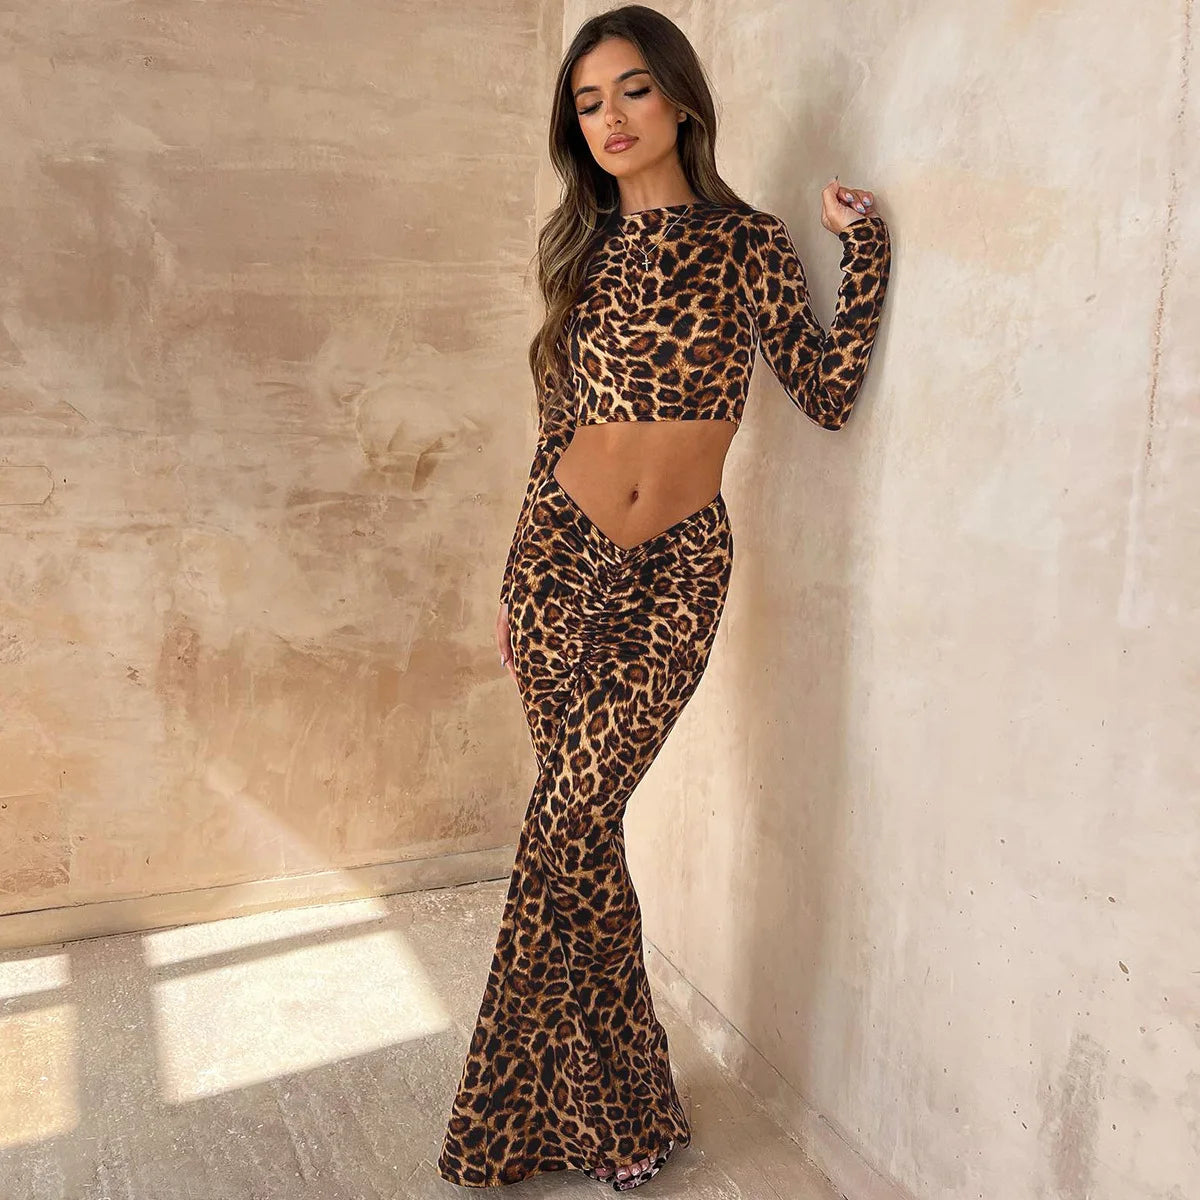 Leopard Print Long Sleeve 2 Piece Set Crop Top and Maxi Skirt Sets Elegant Sexy Clothes for Women Fall Outfit